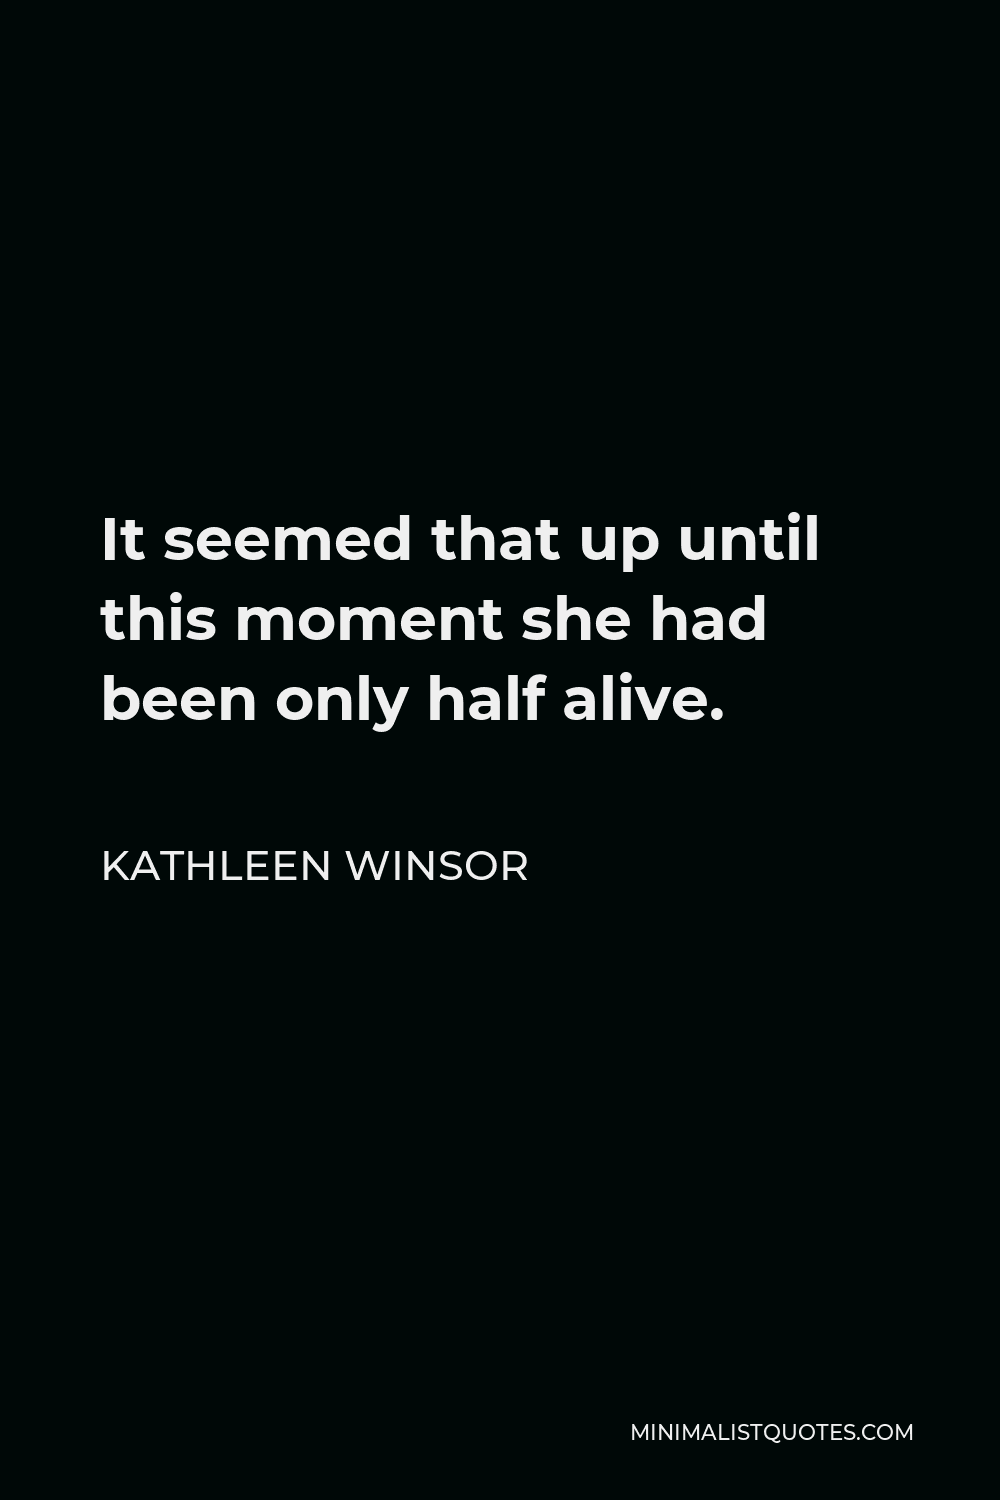 Kathleen Winsor Quote - It seemed that up until this moment she had been only half alive.